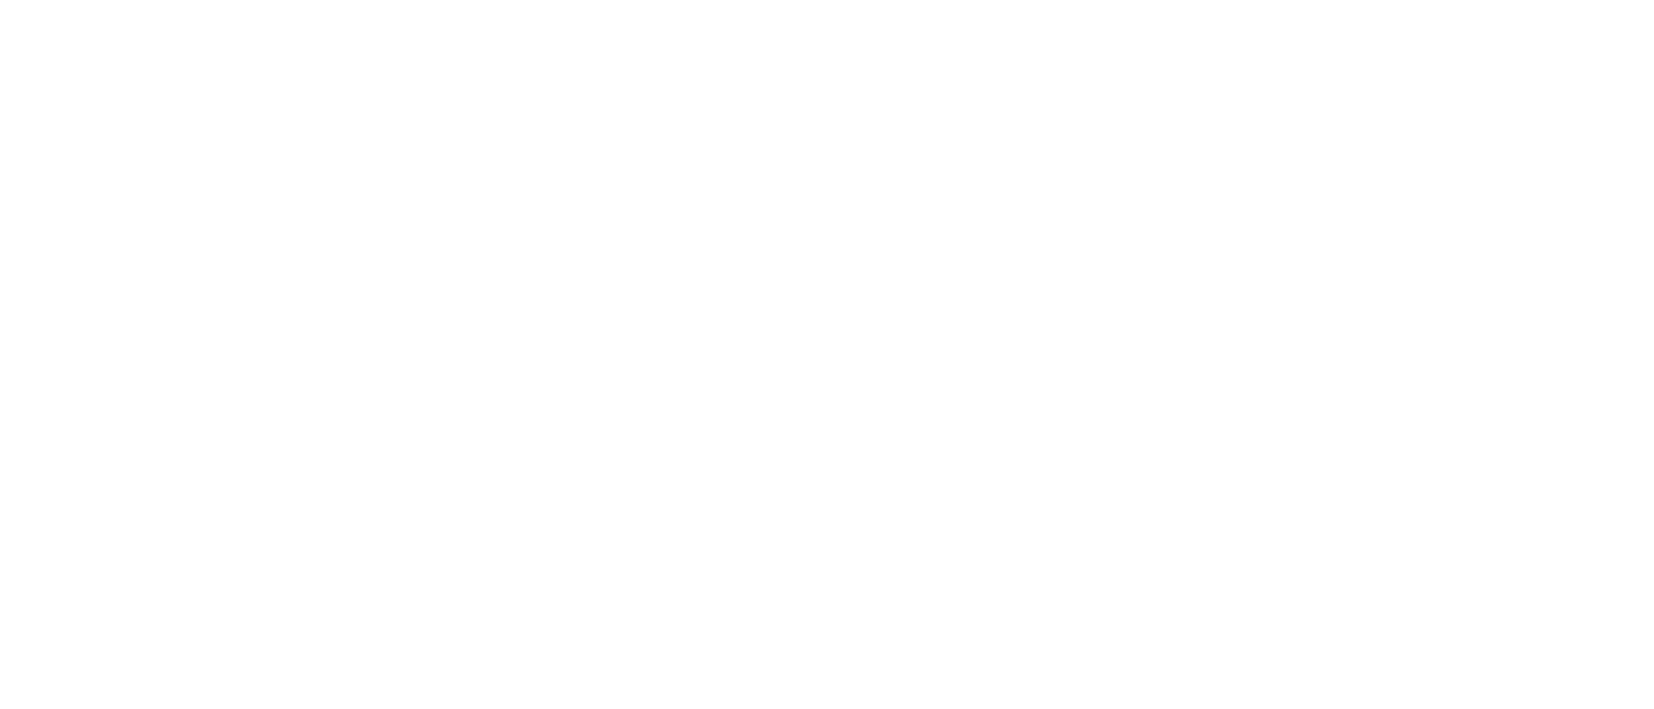 Carlile Swimming Team | Sydney Competitive Swimming Training